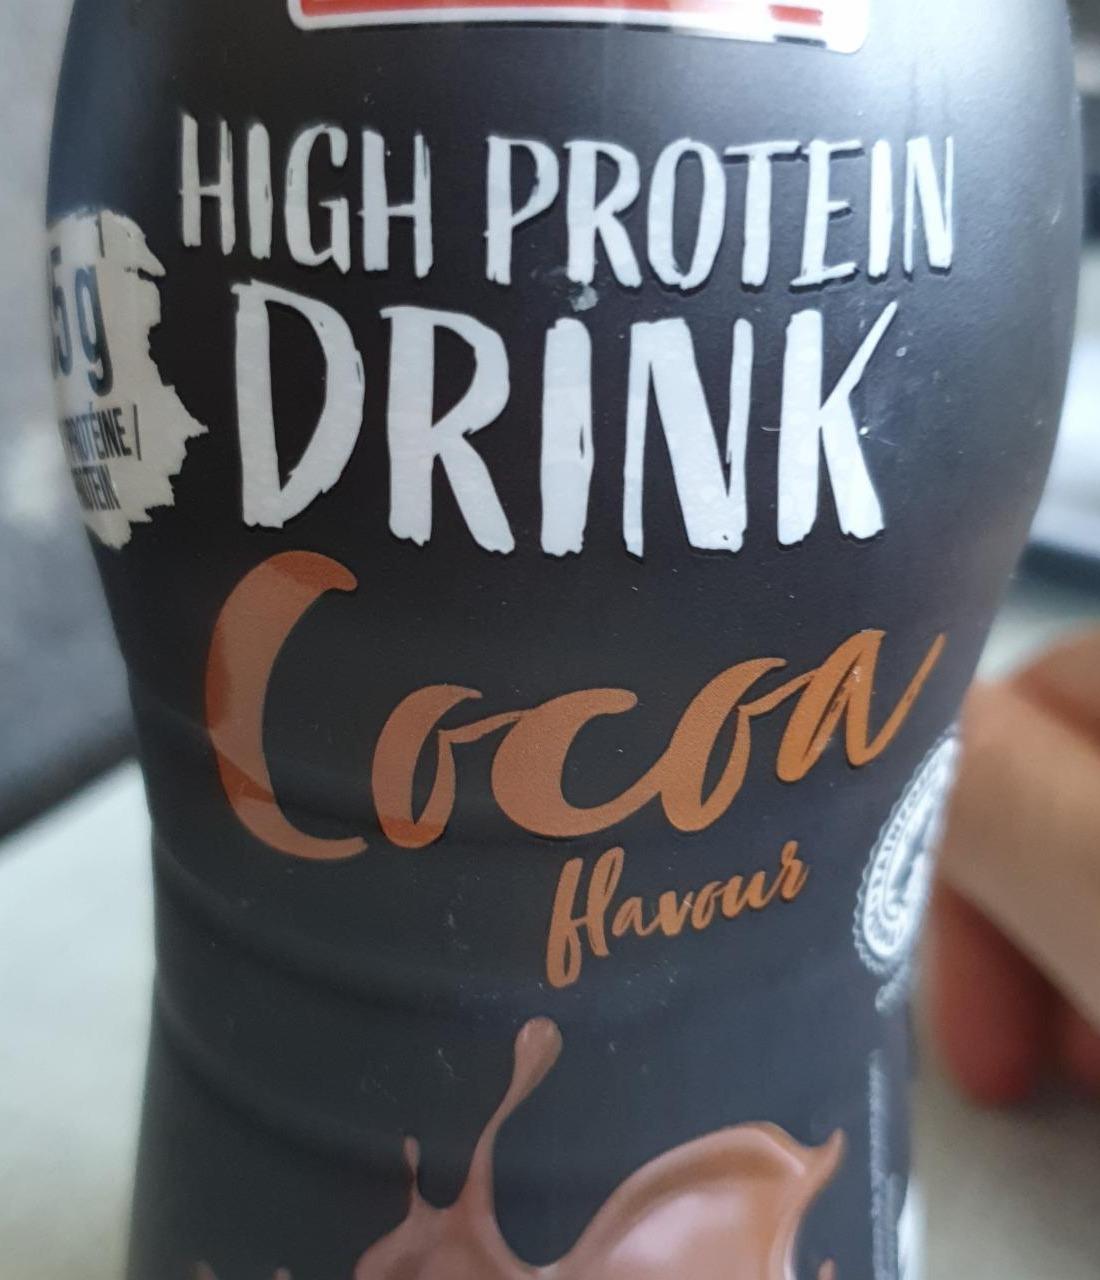 Fotografie - High Protein Drink Cocoa flavour Milsani